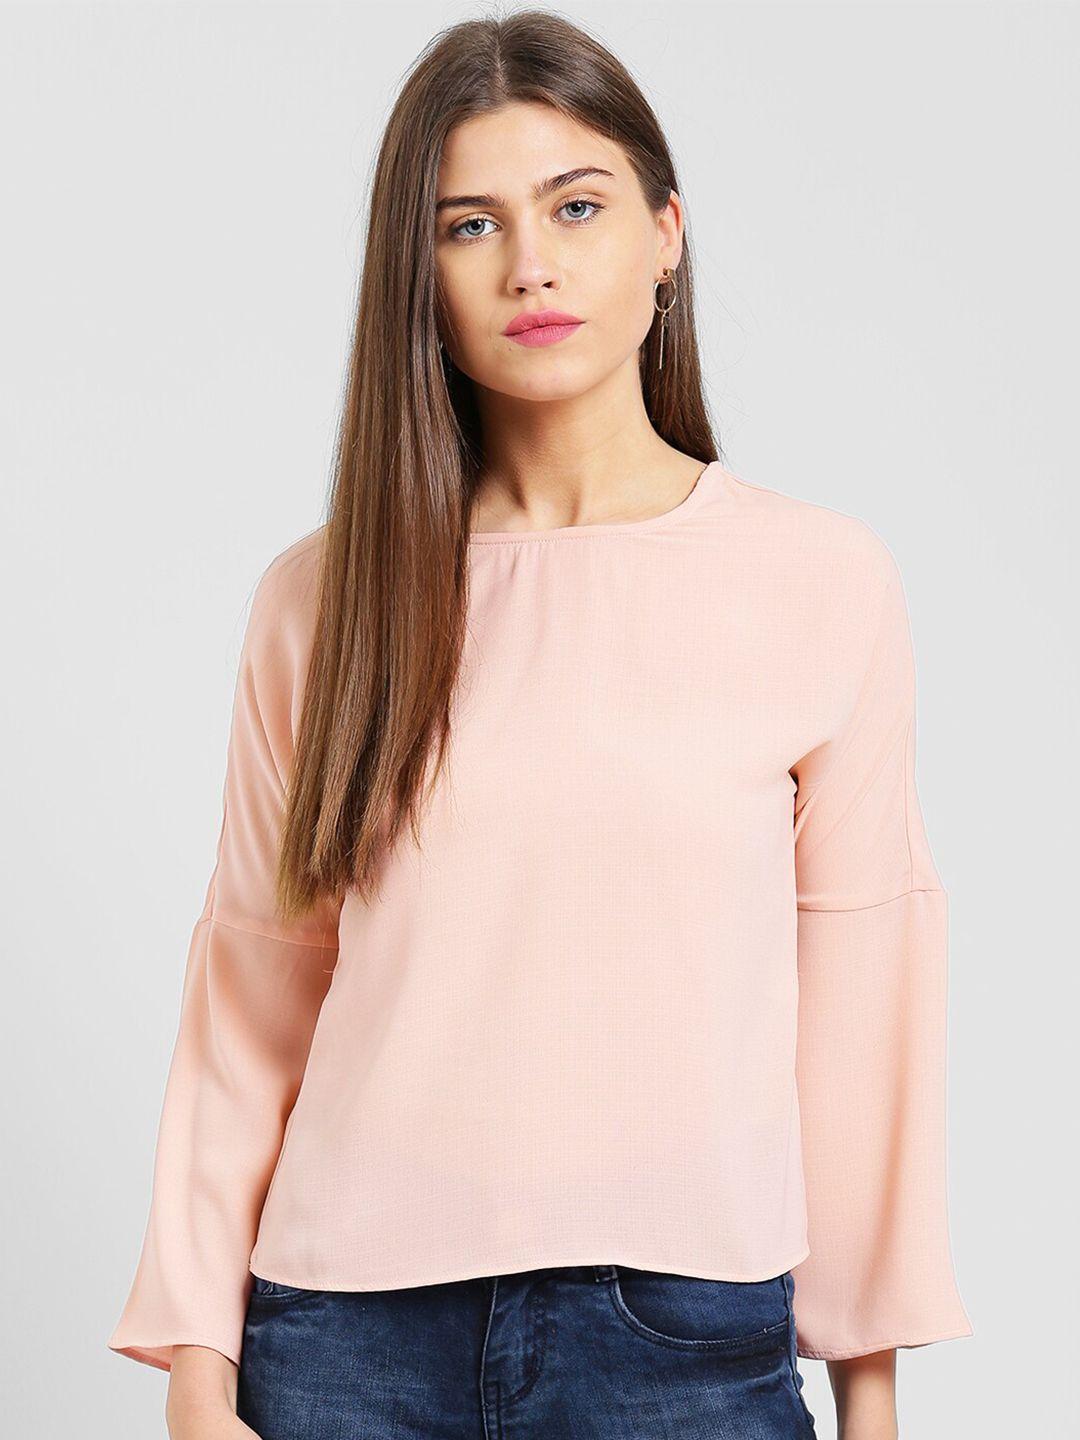 be indi women peach-colored solid pure cotton casual top